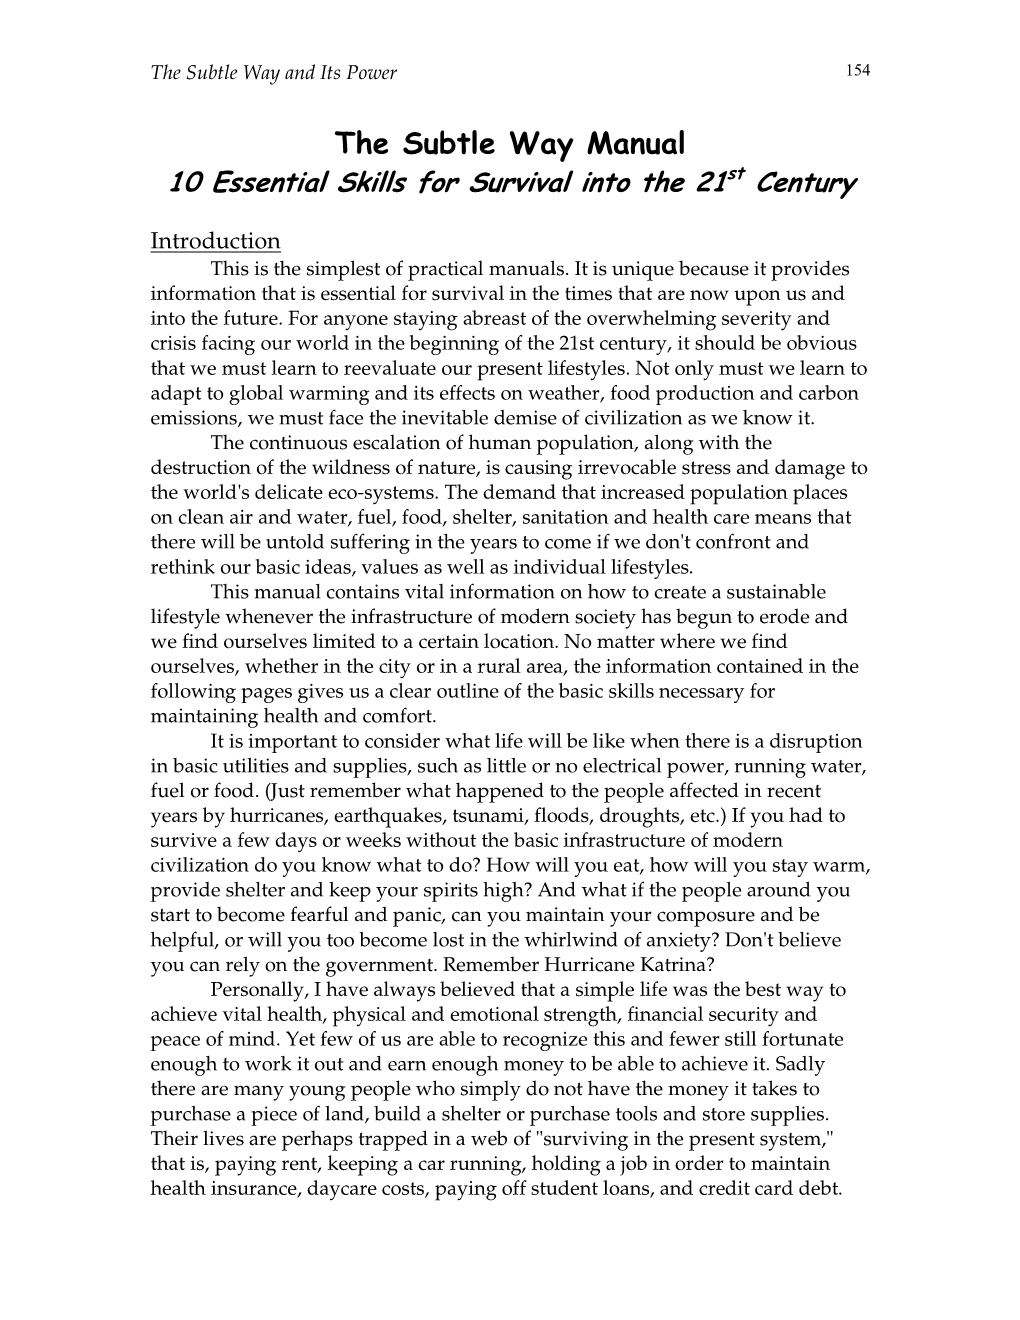 The Subtle Way Manual 10 Essential Skills for Survival Into the 21 St Century